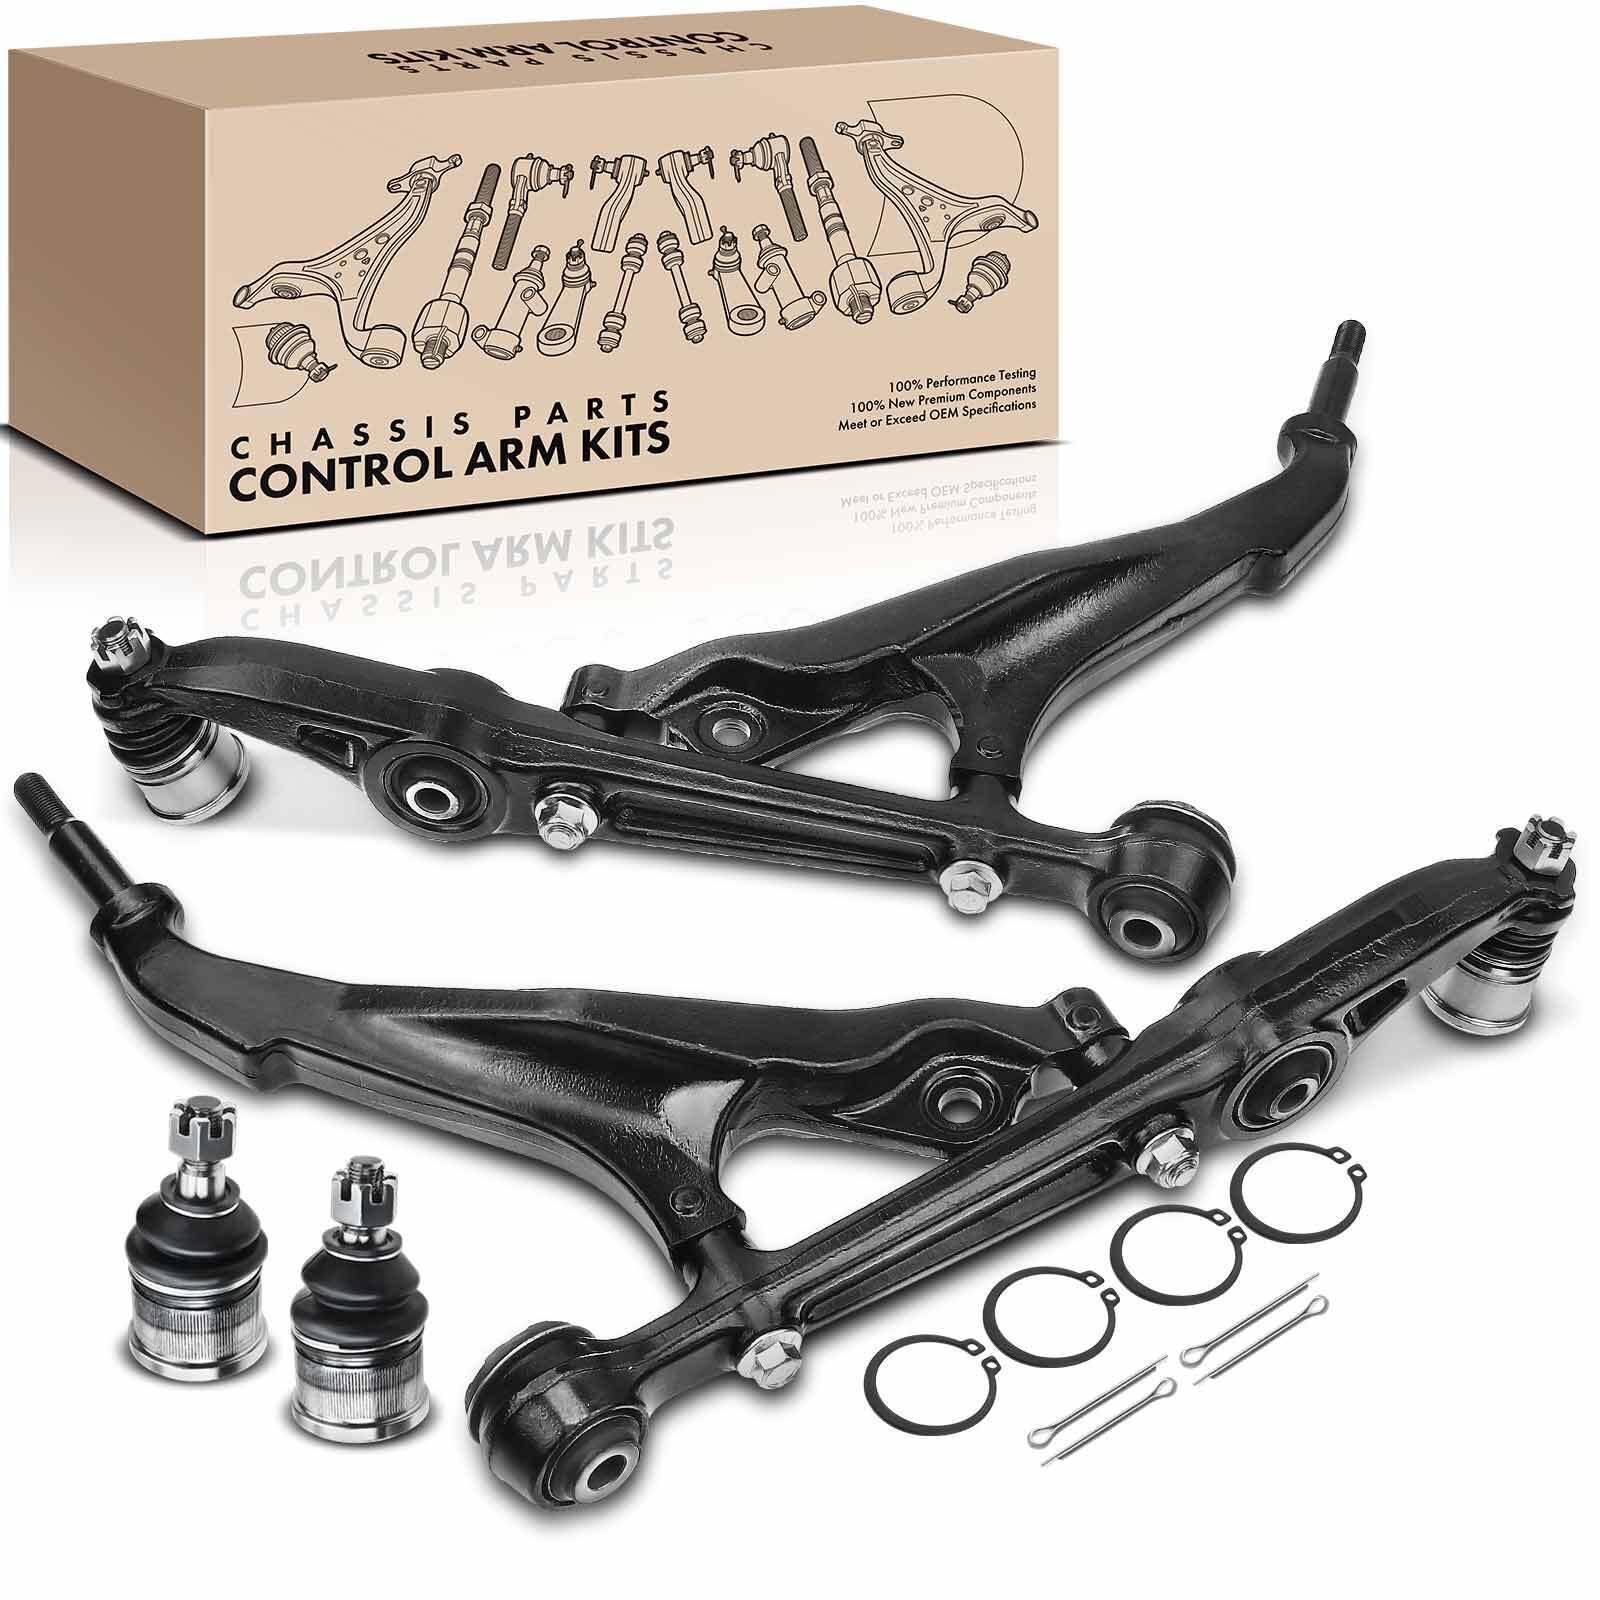 4x Front Lower Control Arms & Ball Joints for Honda Civic 92-95 Civic del Sol